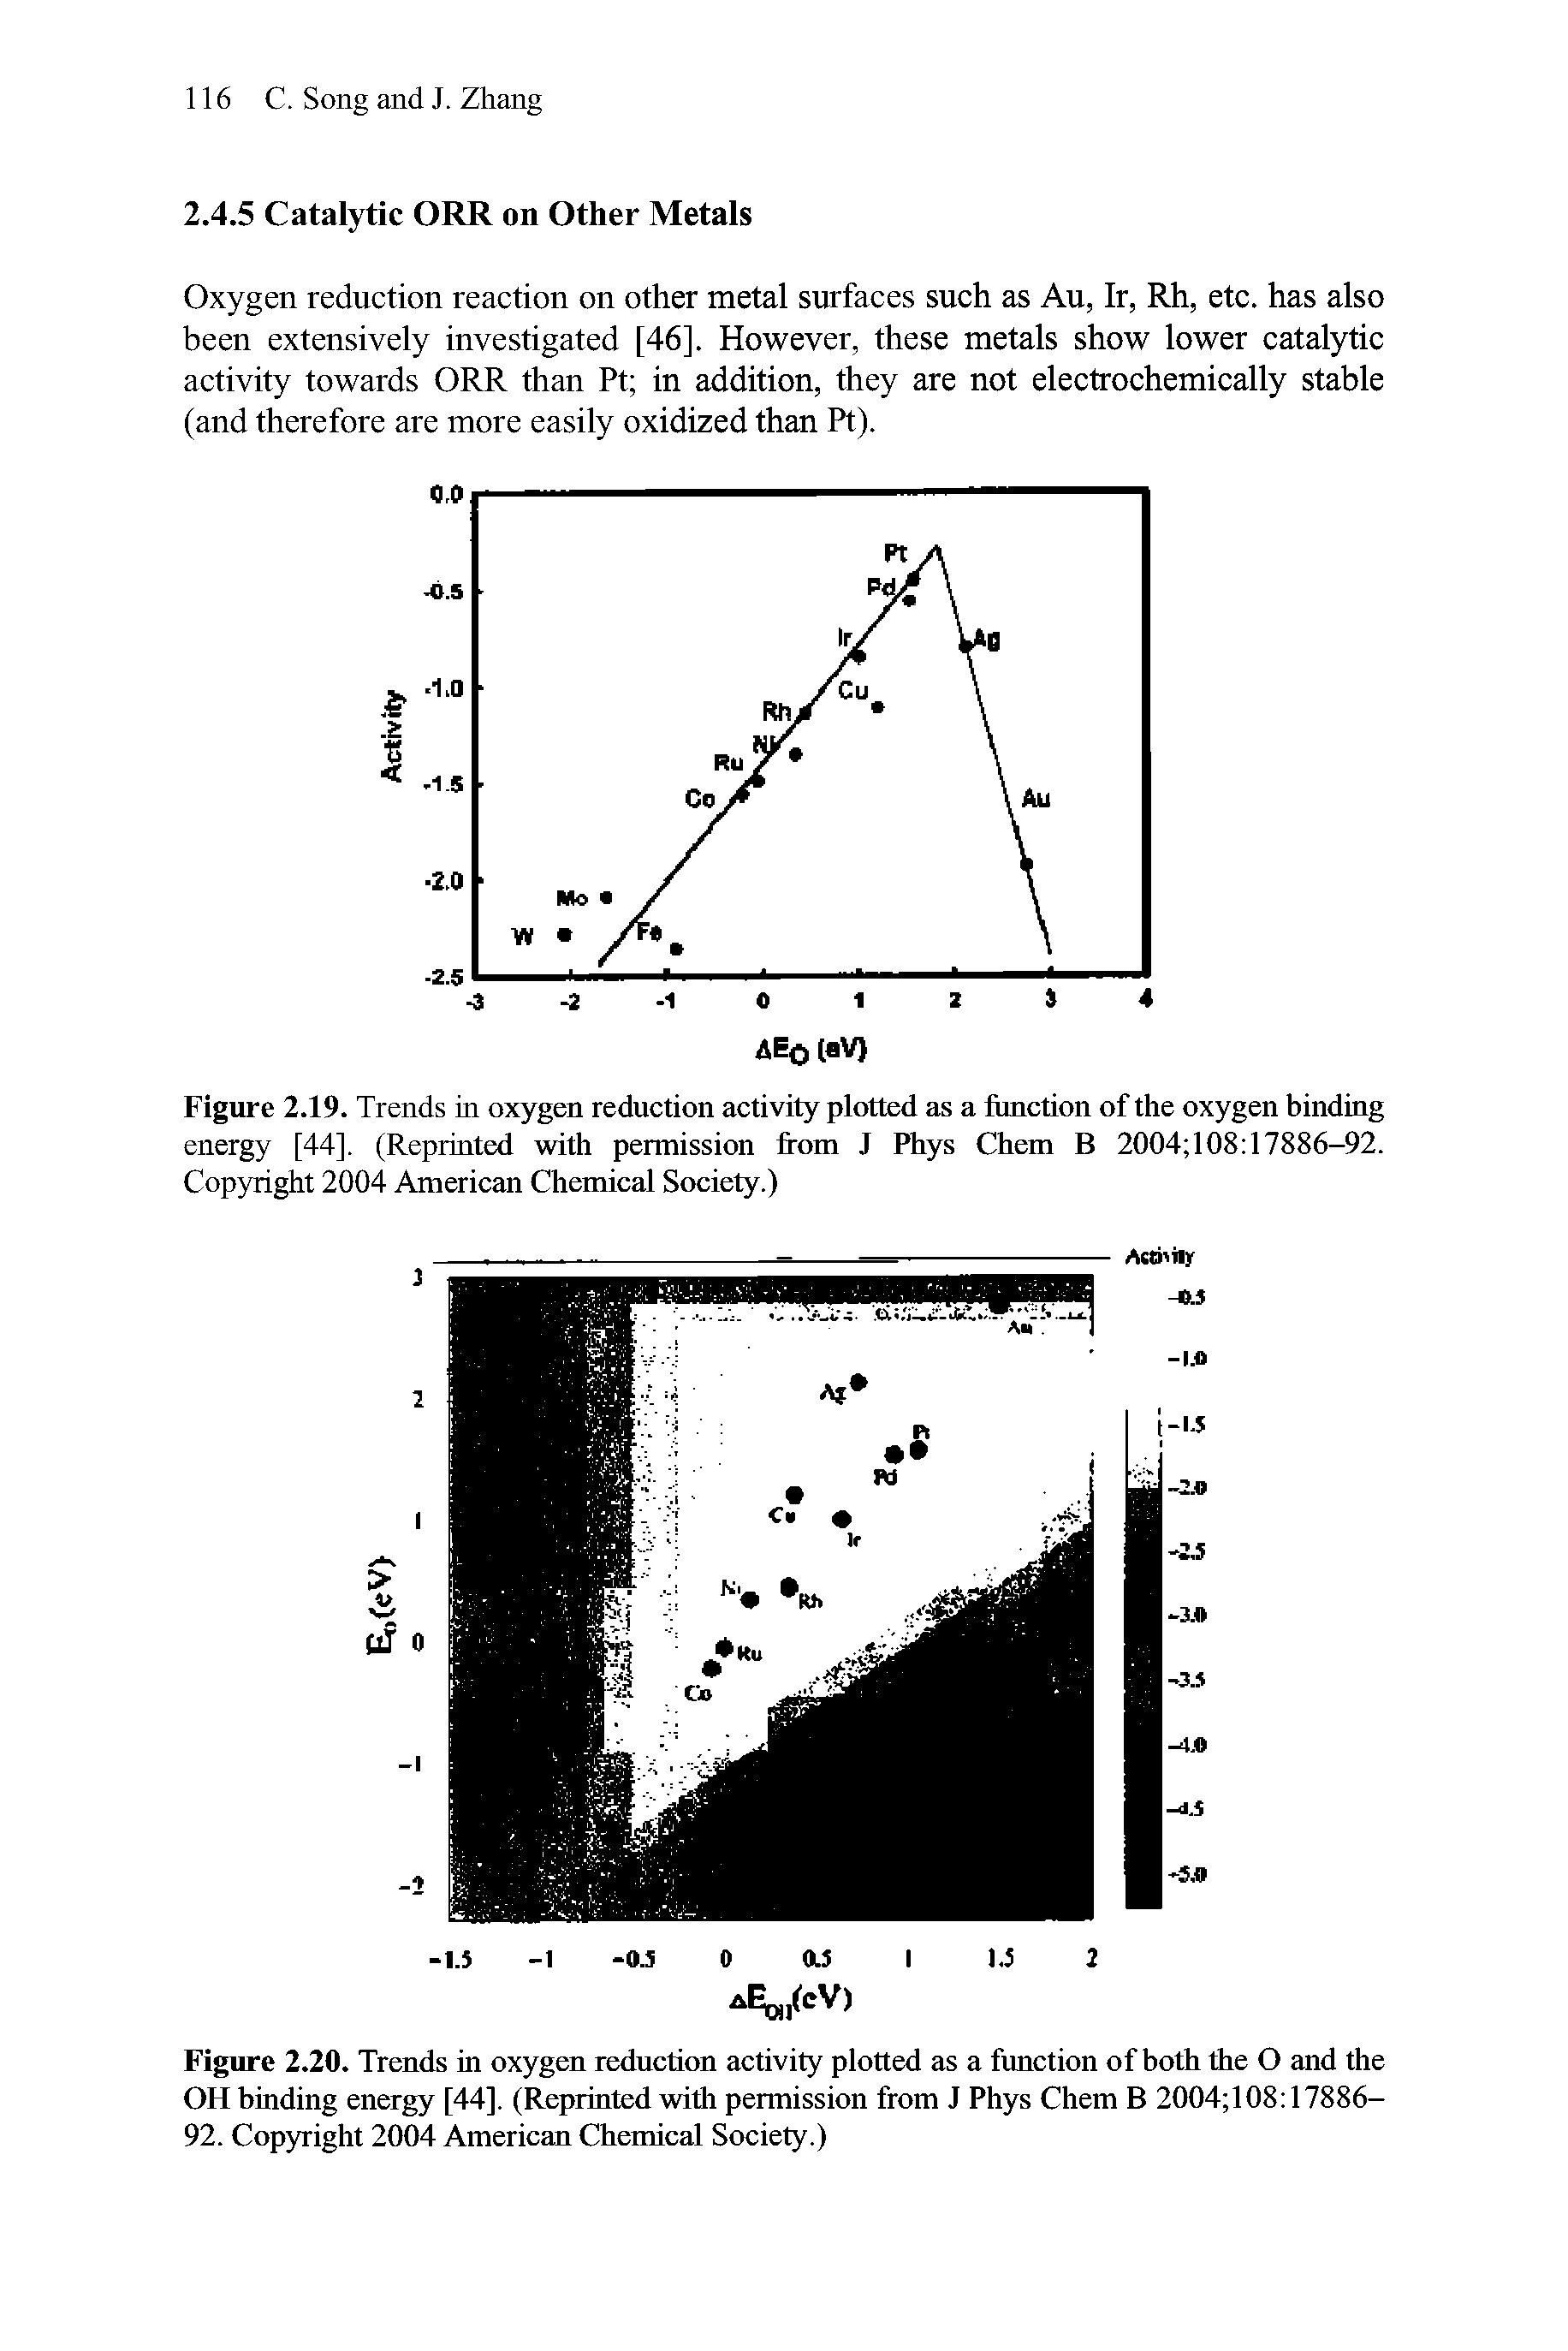 Figure 2.20. Trends in oxygen reduction activity piotted as a fimction of both the O and the OH binding energy [44]. (Reprinted with permission from J Phys Chem B 2004 108 17886-92. Copyright 2004 American Chemical Society.)...